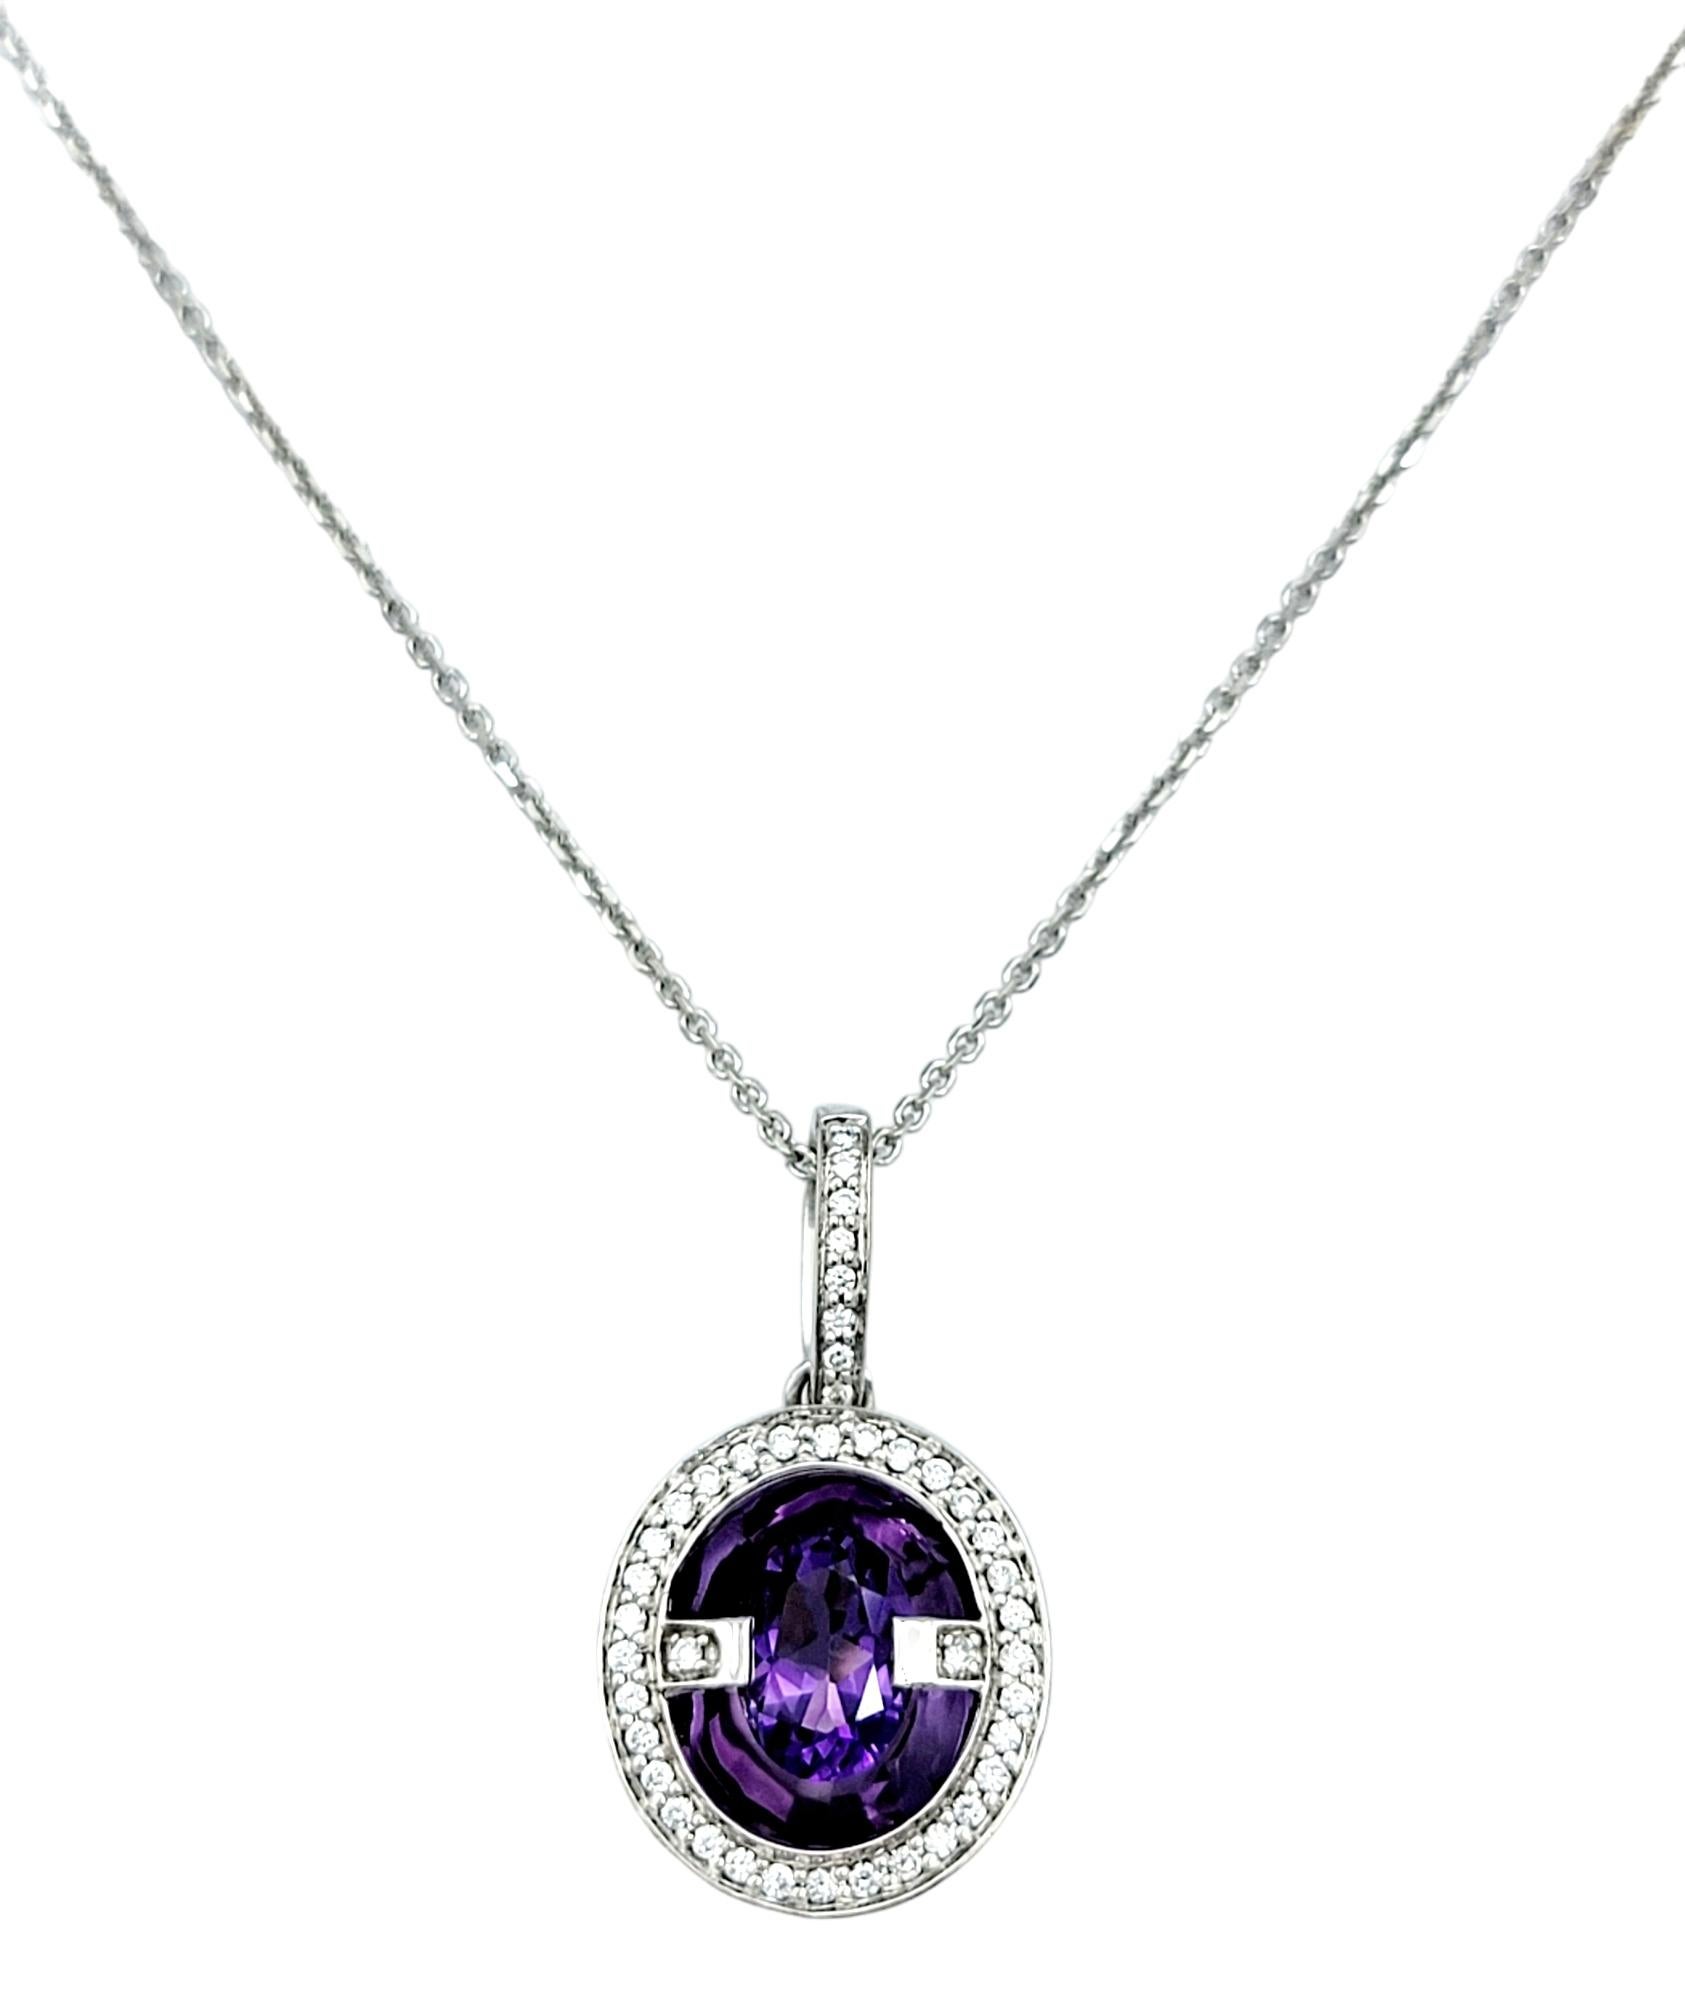 This exquisite oval amethyst and diamond pendant, delicately set in 14 karat white gold, exudes elegance and grace. The oval amethyst appears to float at the center of the pendant, surrounded by a halo of sparkling diamonds that add a touch of